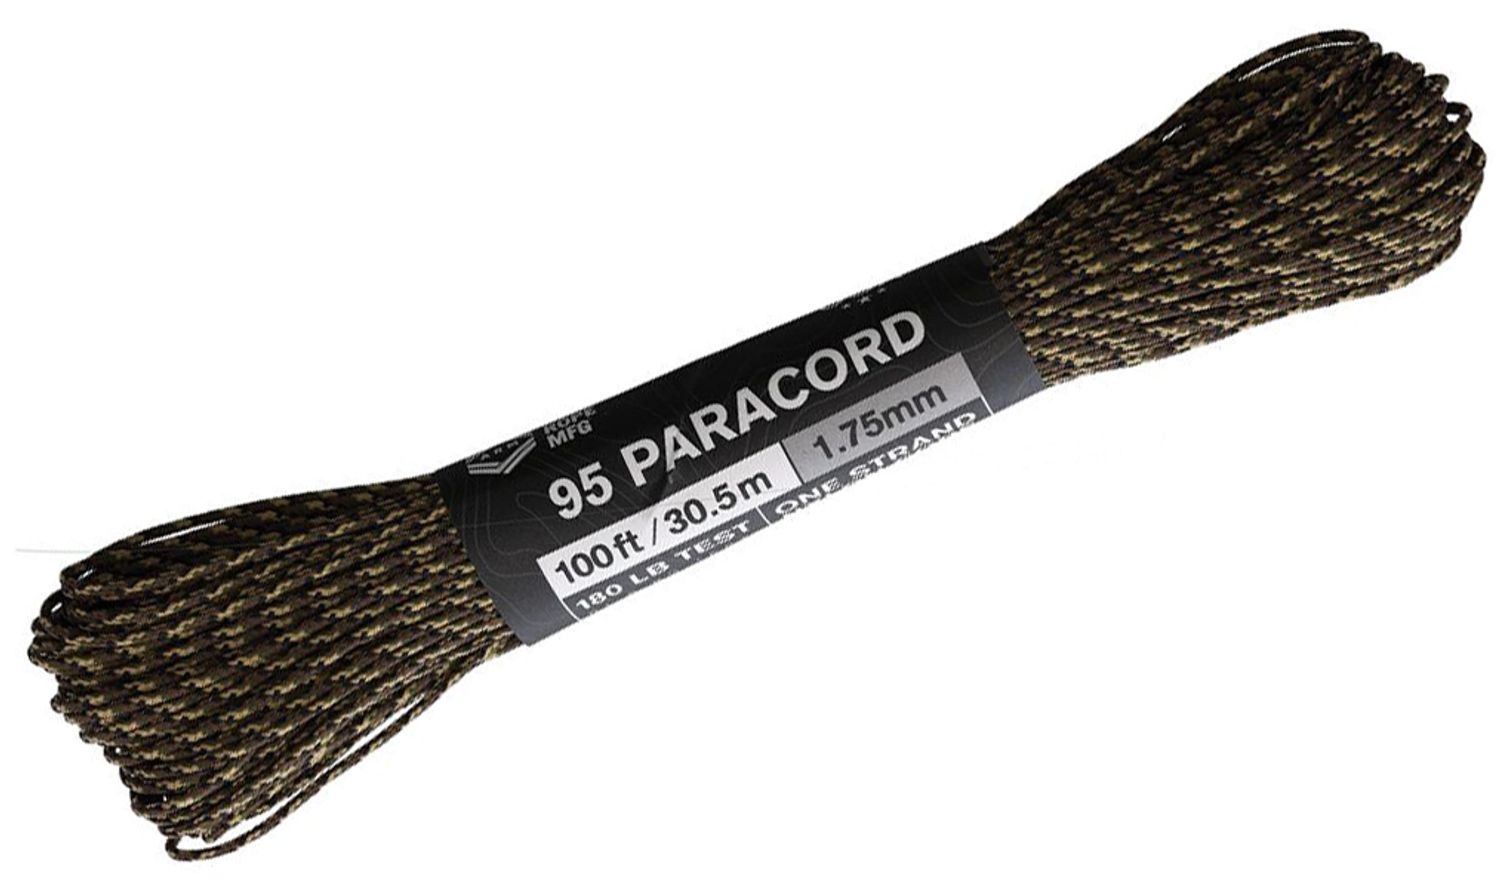 Atwood Rope 95 Paracord, Ground War, 100 Feet - KnifeCenter - RG1324H